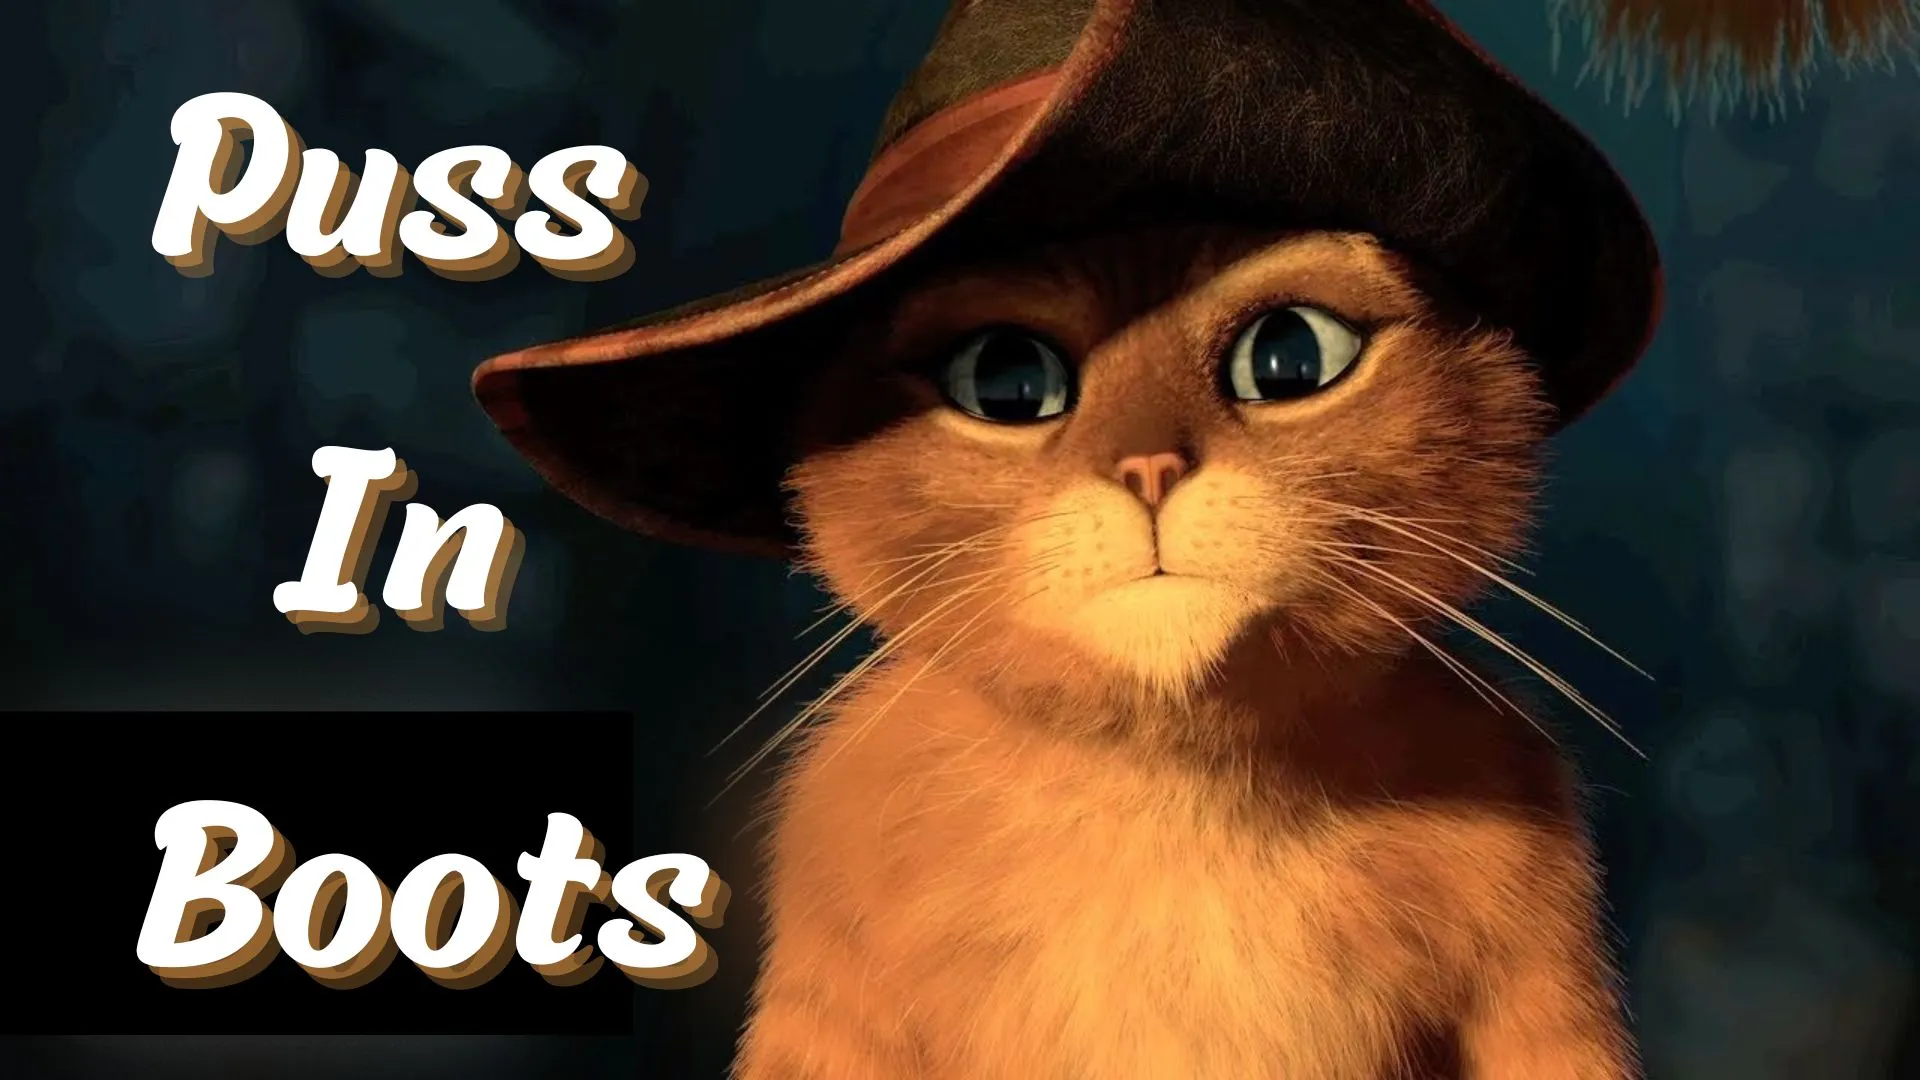 Puss in Boots Parents Guide